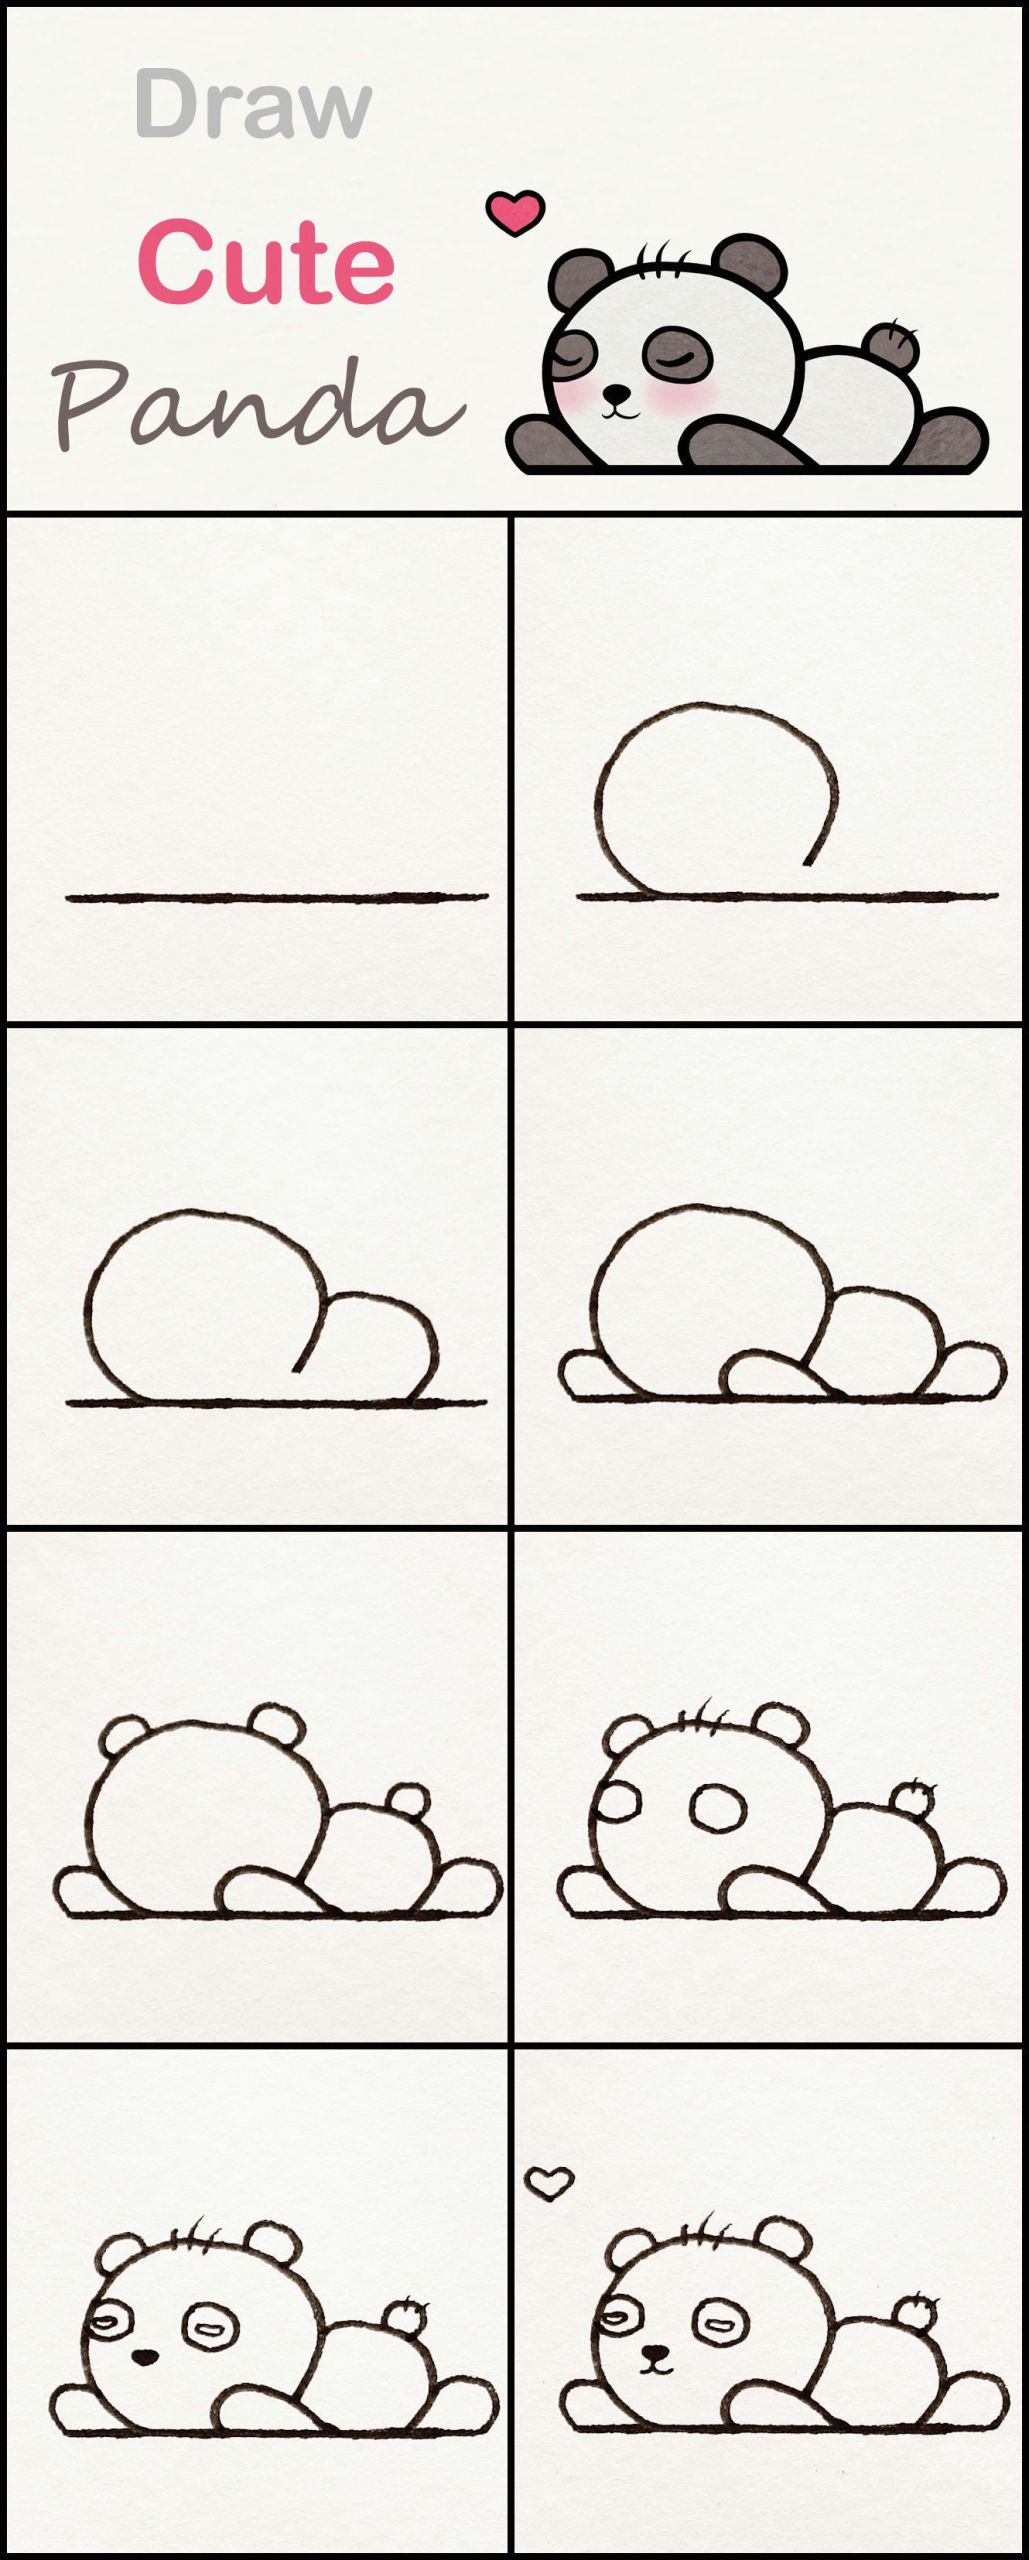 Simple Baby Drawing Easy Learn How to Draw A Cute Baby Panda Step by Step A Very